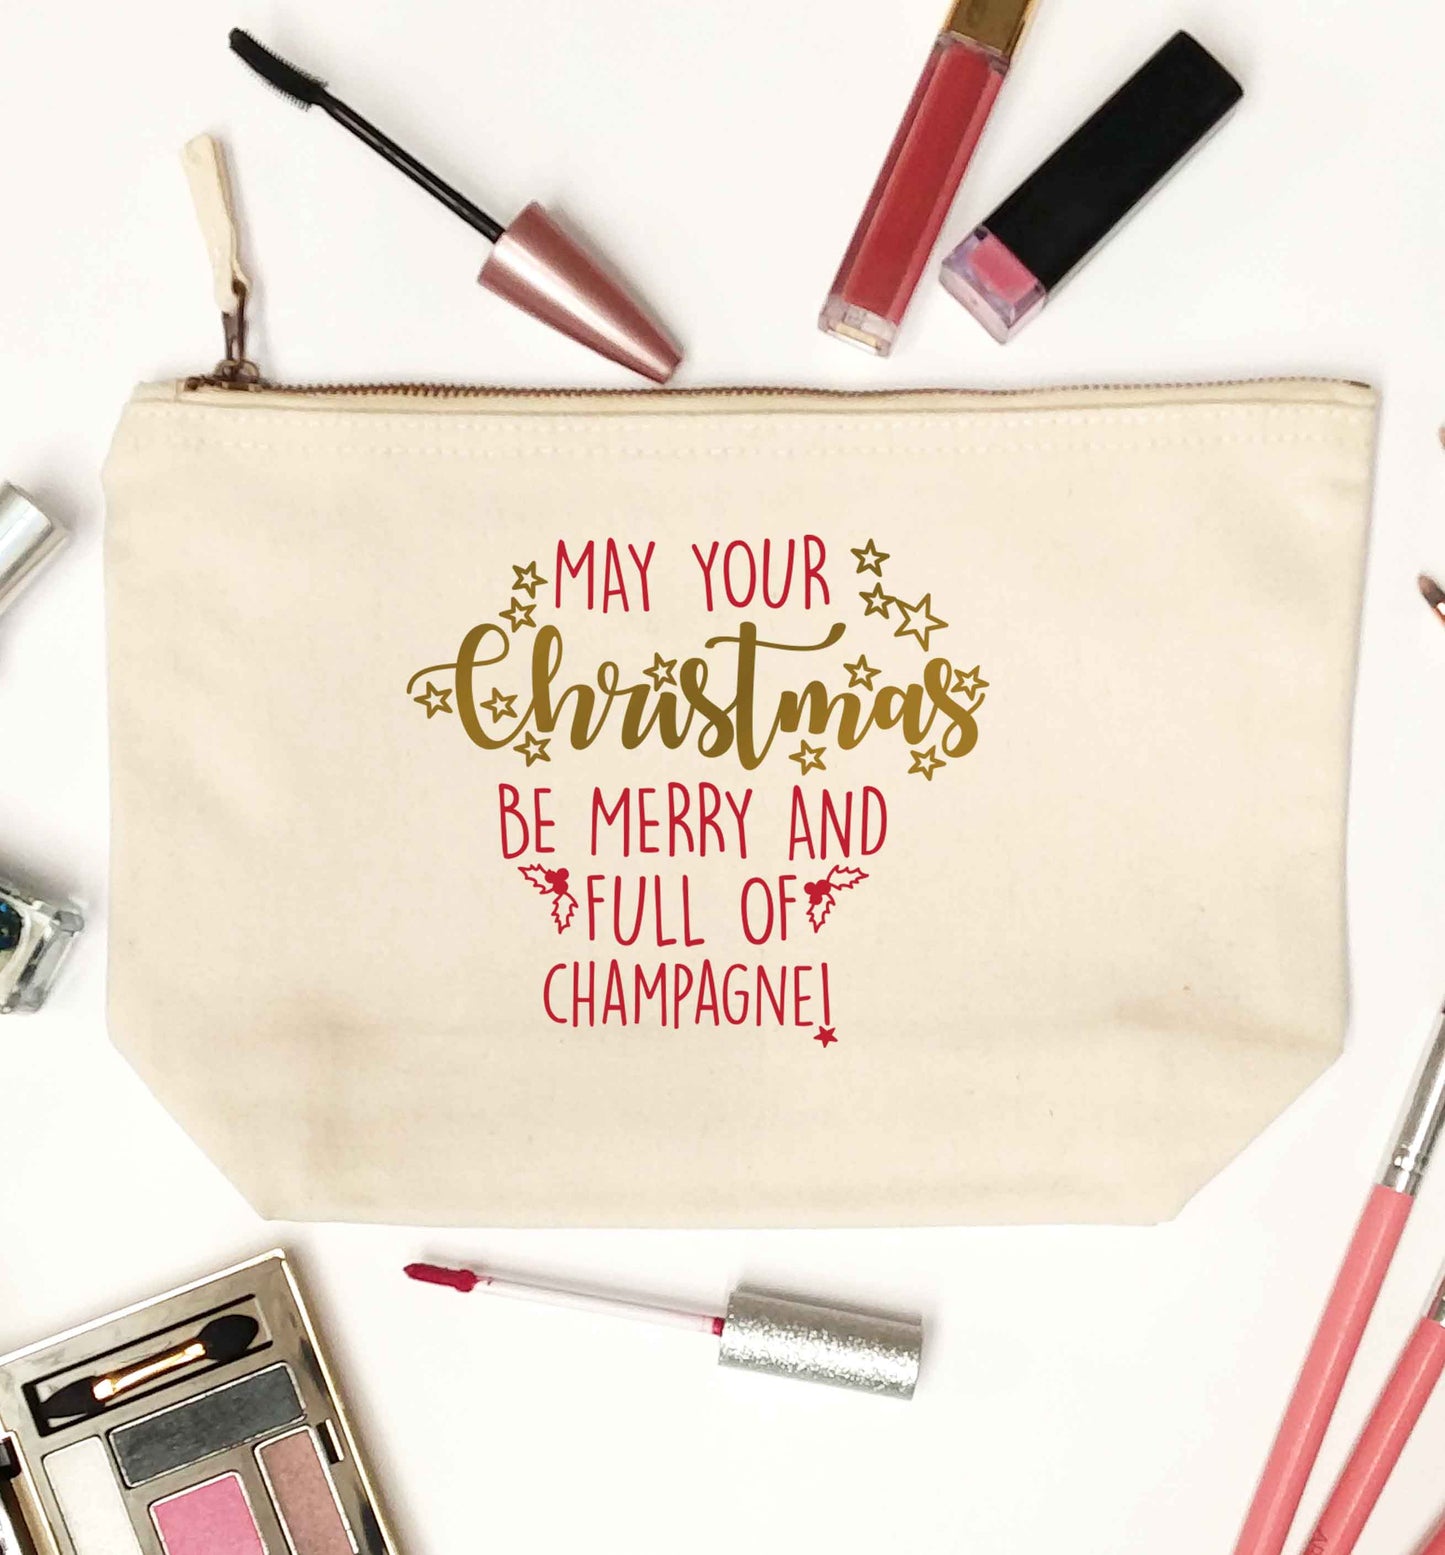 May your Christmas be merry and full of champagne natural makeup bag